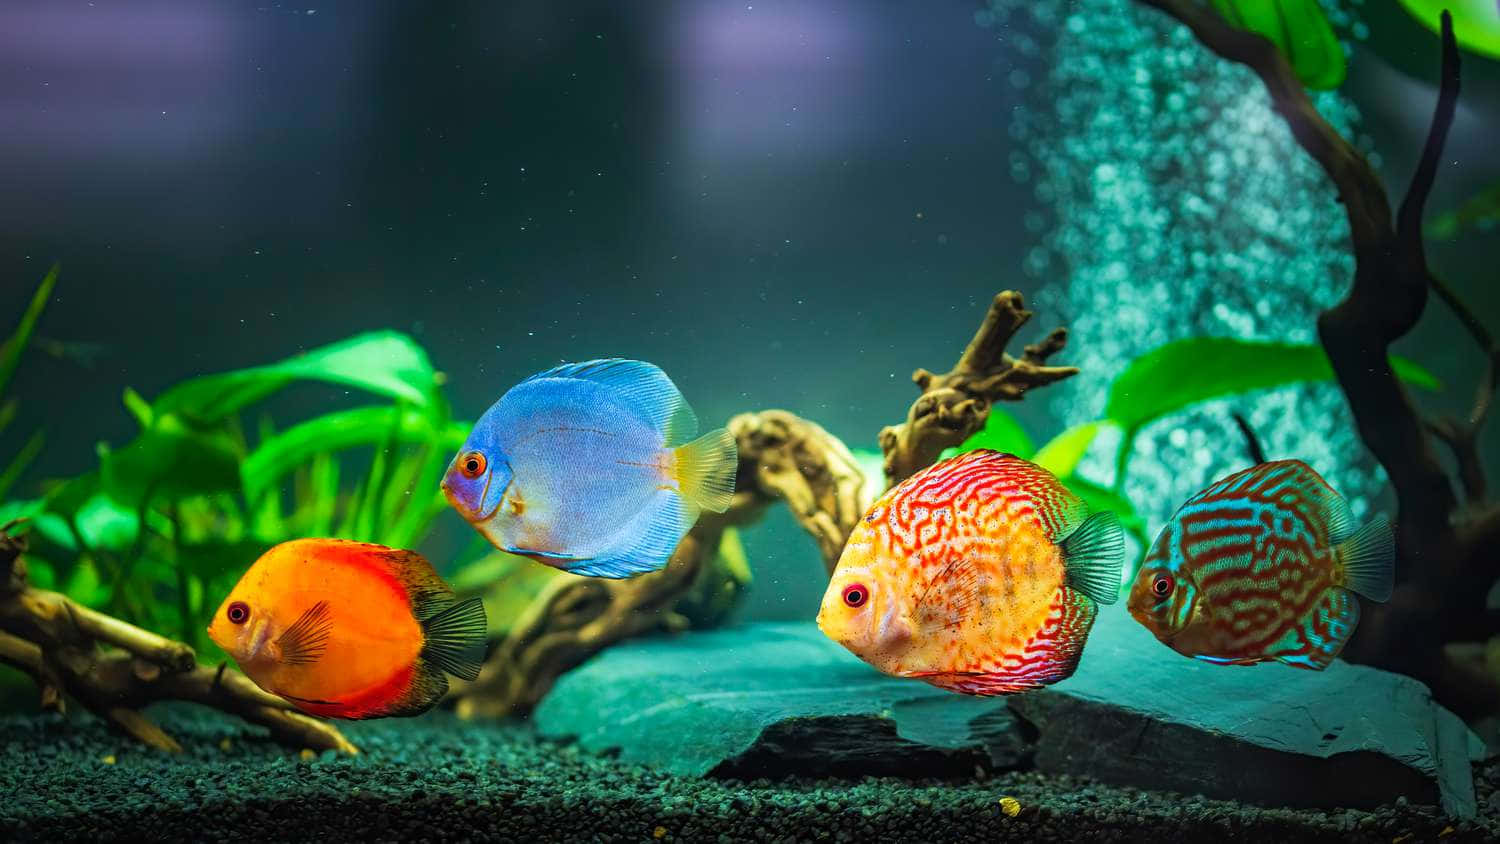 Desktop Wallpaper Beautiful Fishes In Aquarium Hd Image Picture  Background To Upc